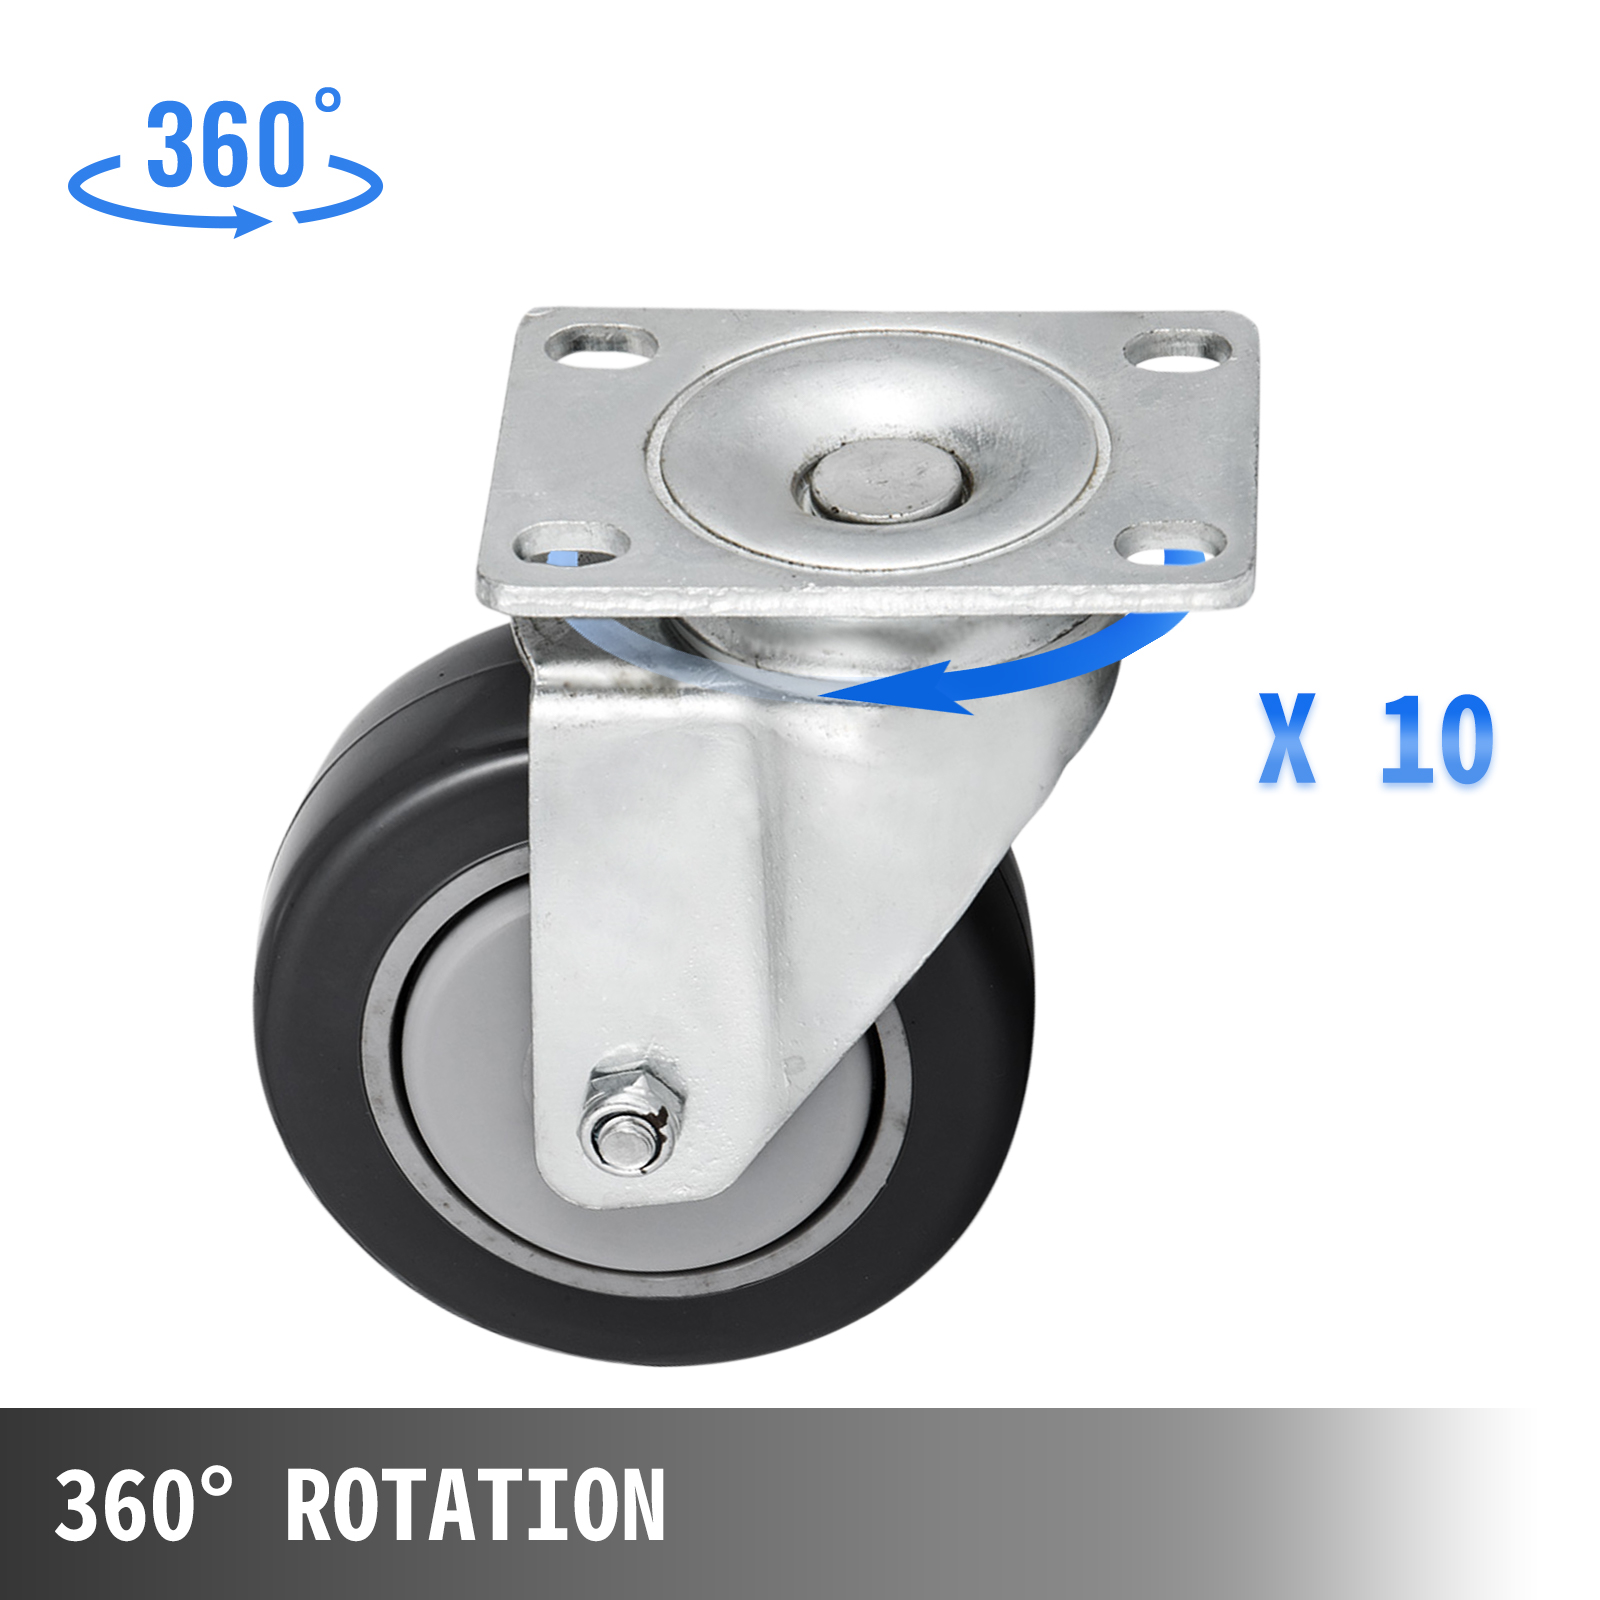 12 Plate Casters with 4" Polyurethane Wheels All Swivel and 6 Brake Tough Caster 